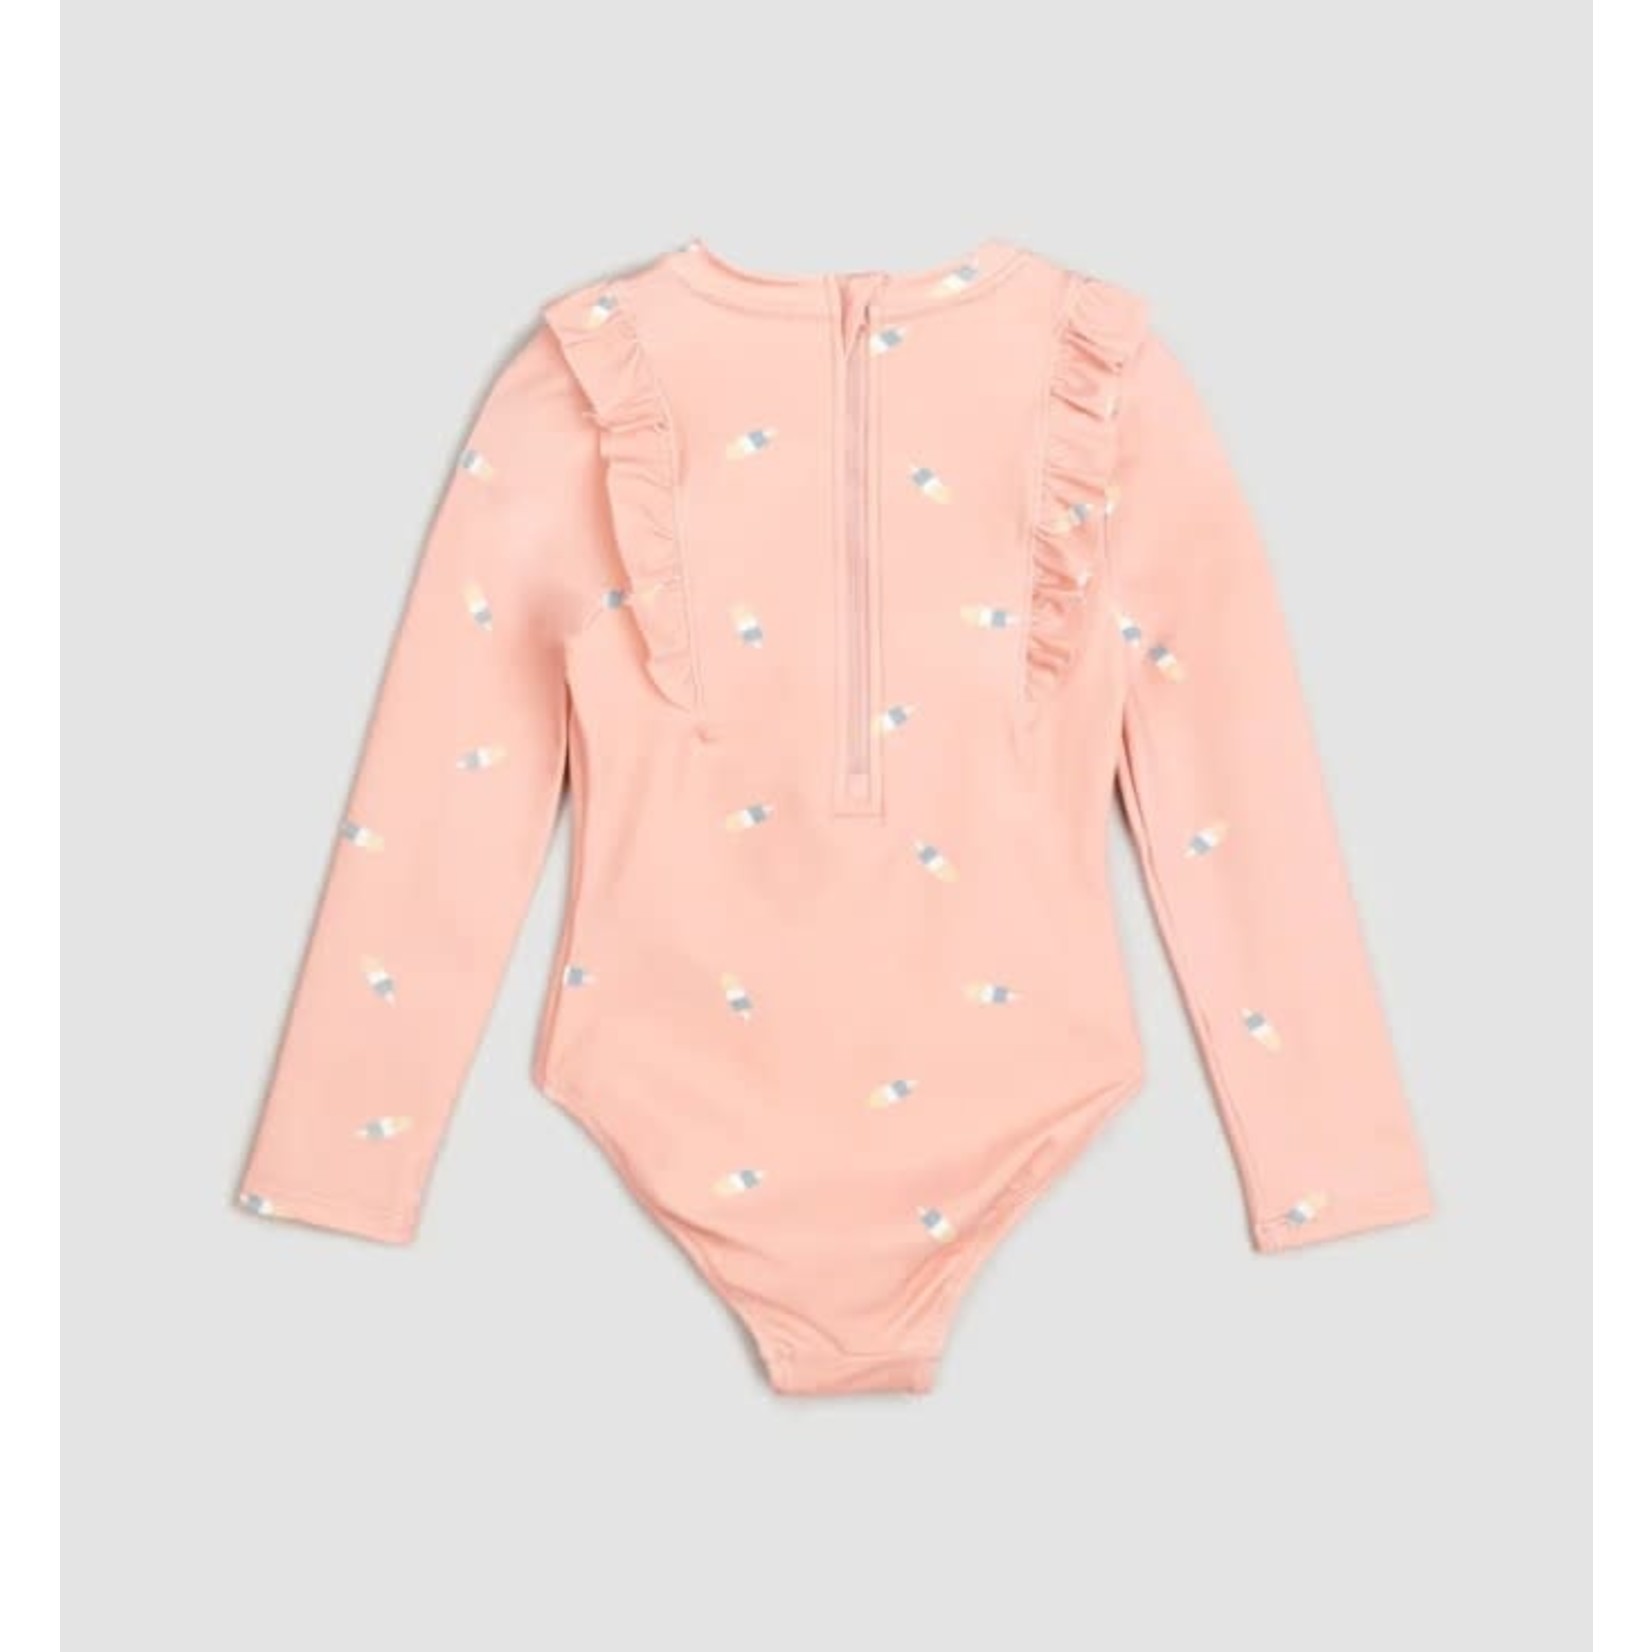 Miles the label MILES THE LABEL - Popsicle Print on Dusty Pink Long-Sleeve One-Piece Swimsuit